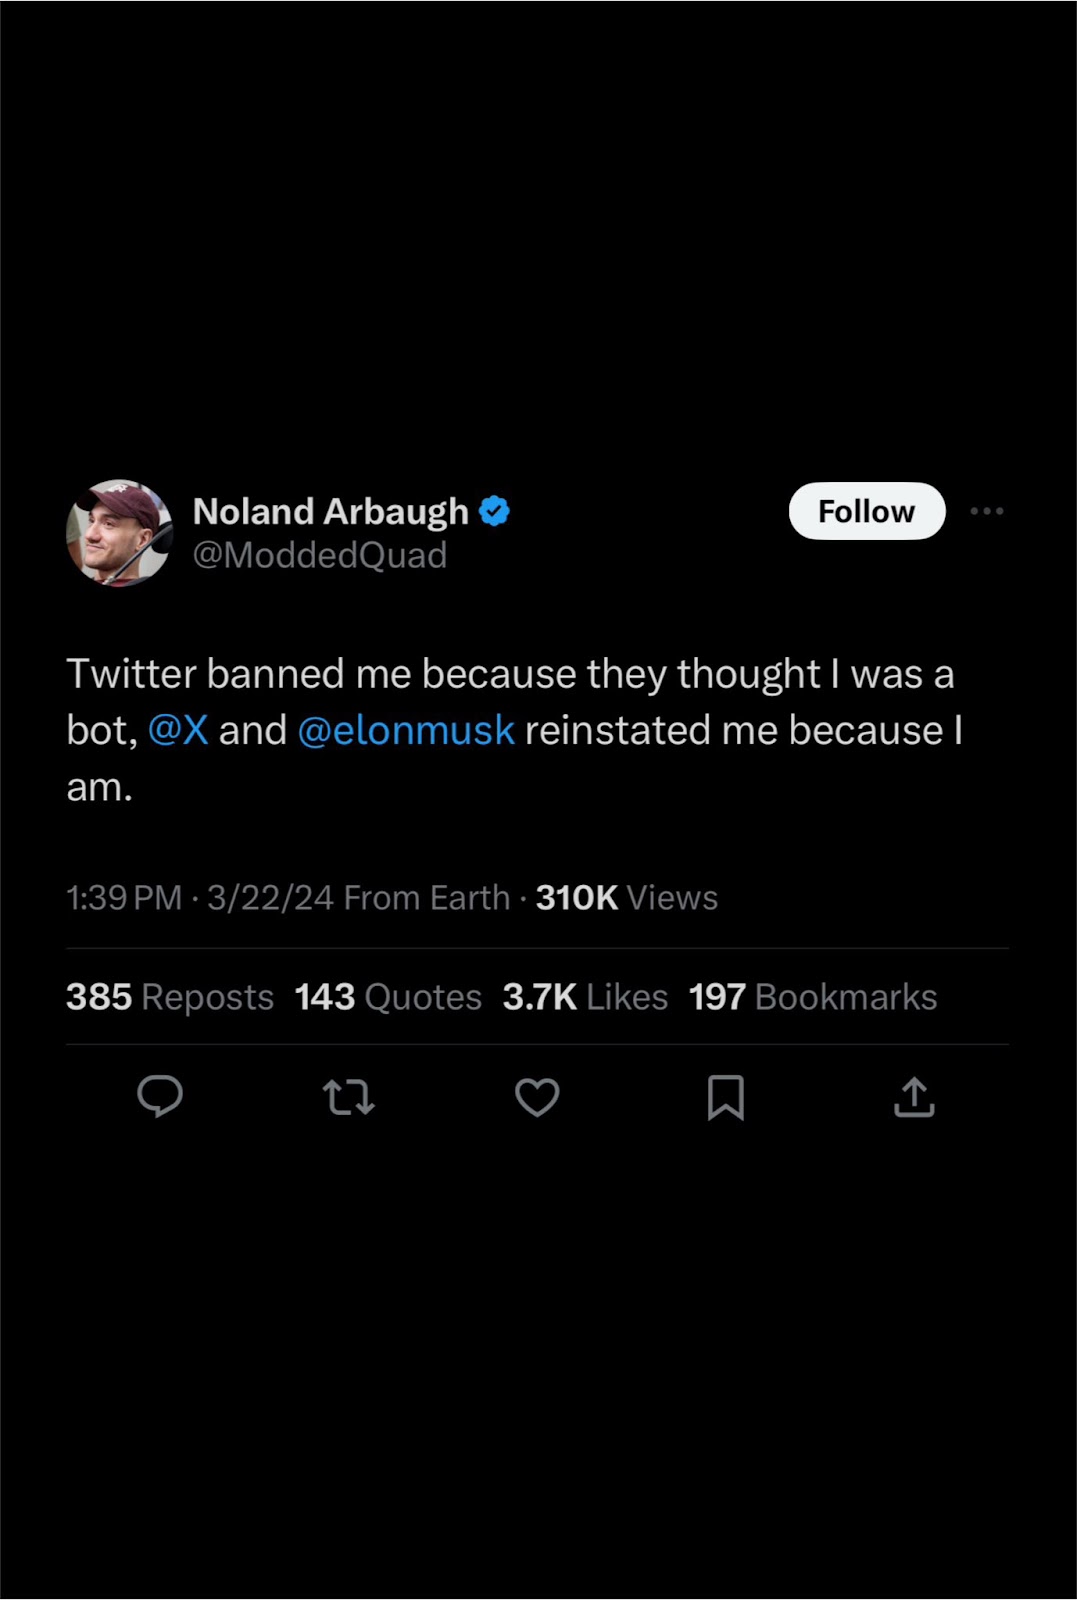 PHOTO Noland Arbaugh banned from Twitter because they thought he